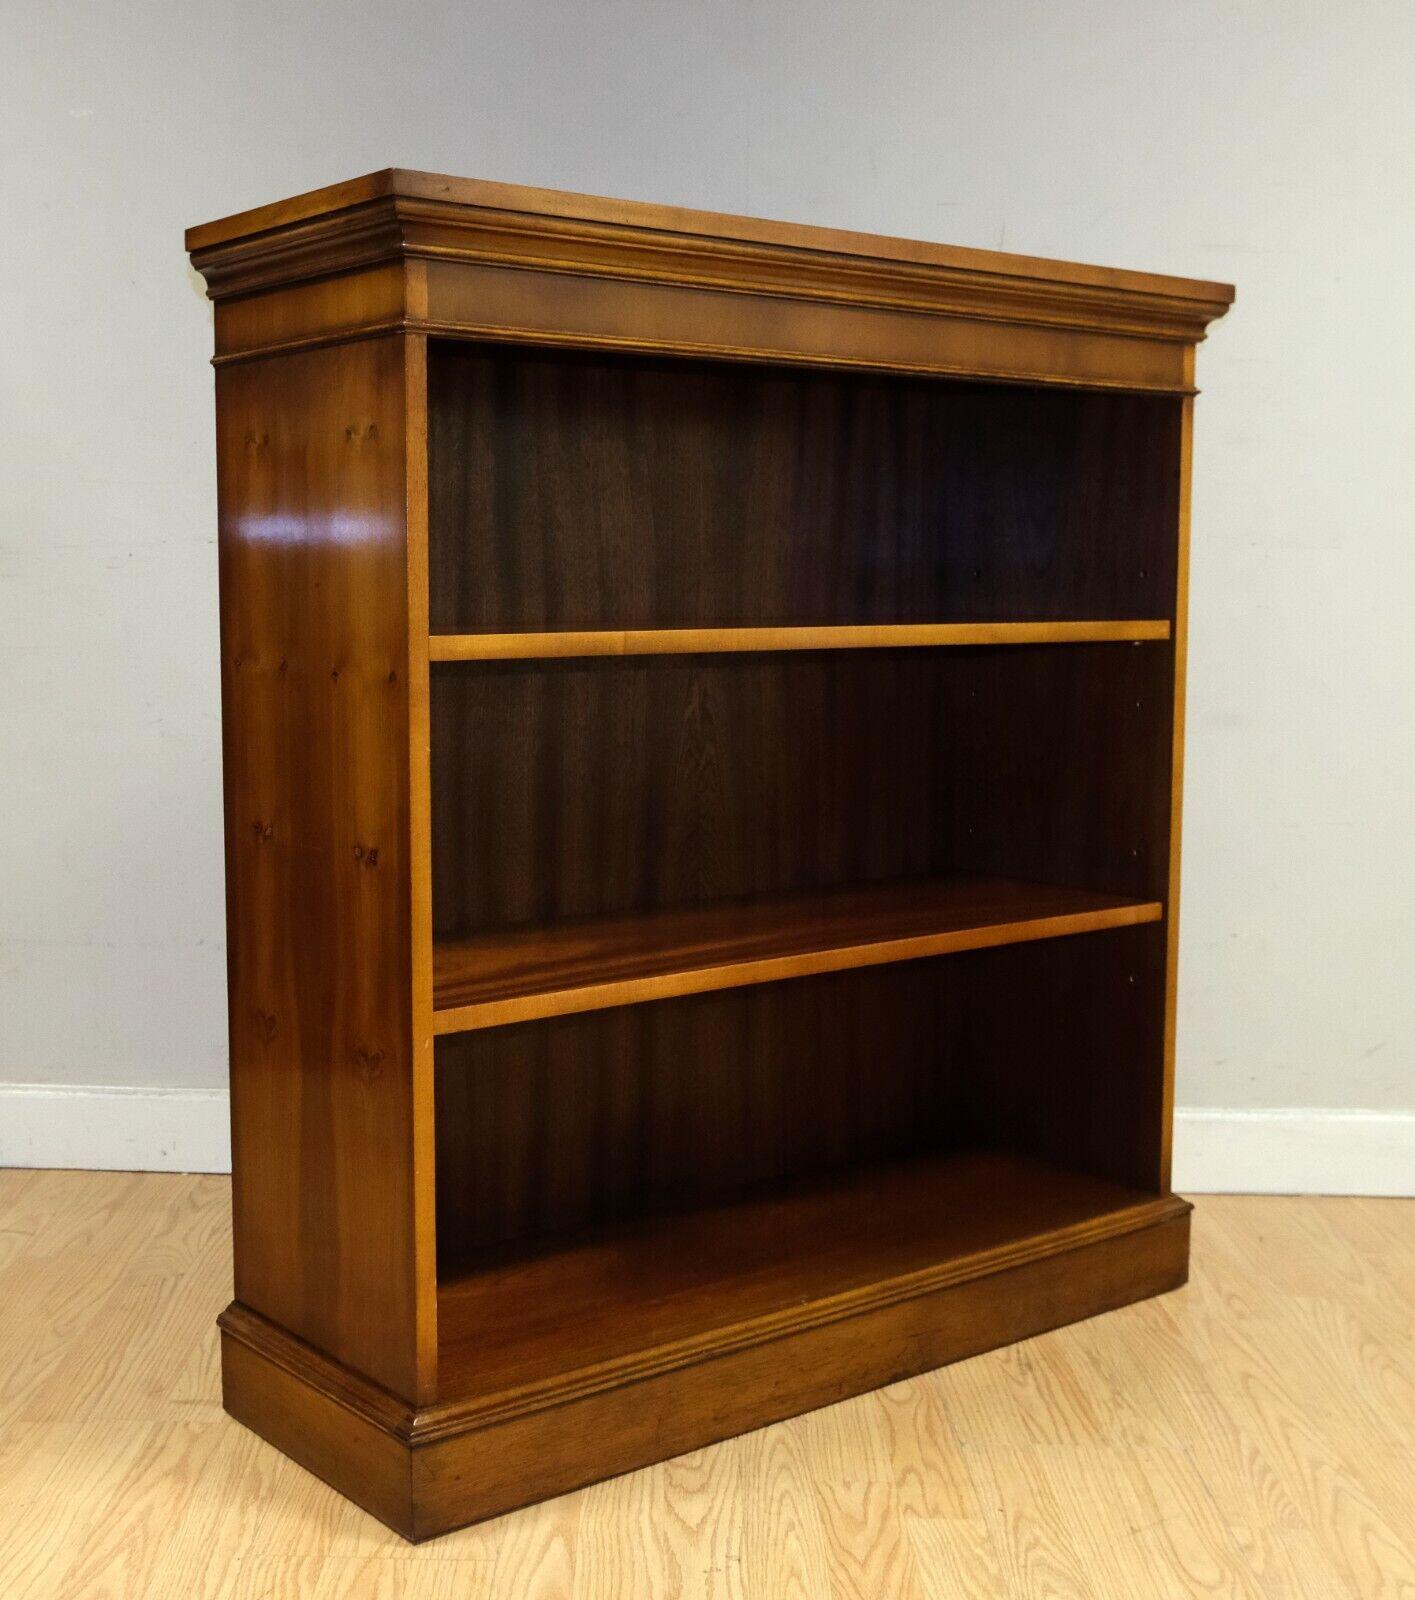 We are delighted to offer for sale this lovely Bradley Burr yew wood low open bookcase with adjustable shelves. 

A very well made, stable and good looking piece made by the well known furniture English brand Bradley. This piece features a pair of